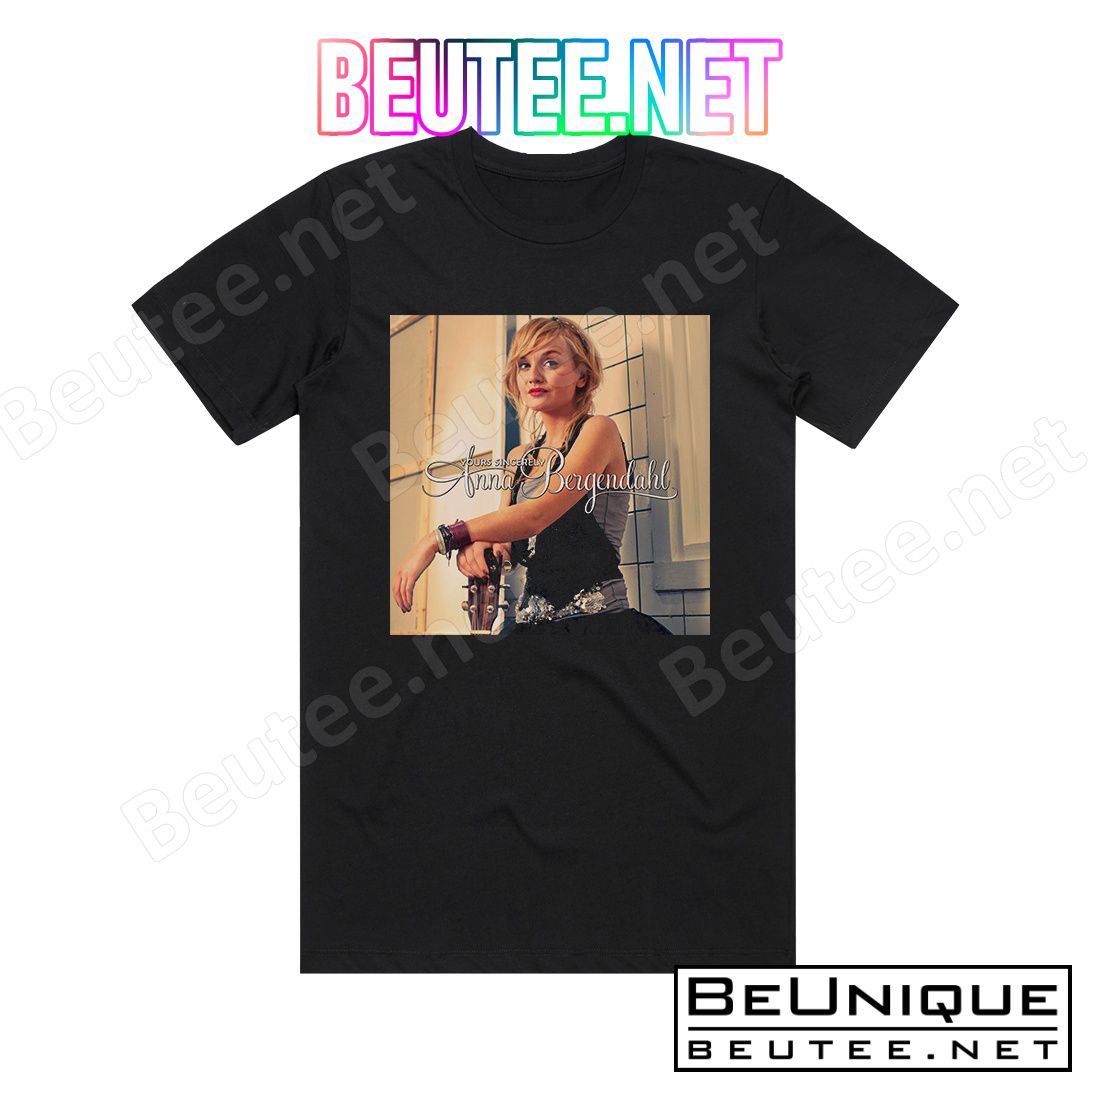 Anna Bergendahl Yours Sincerely Album Cover T-Shirt